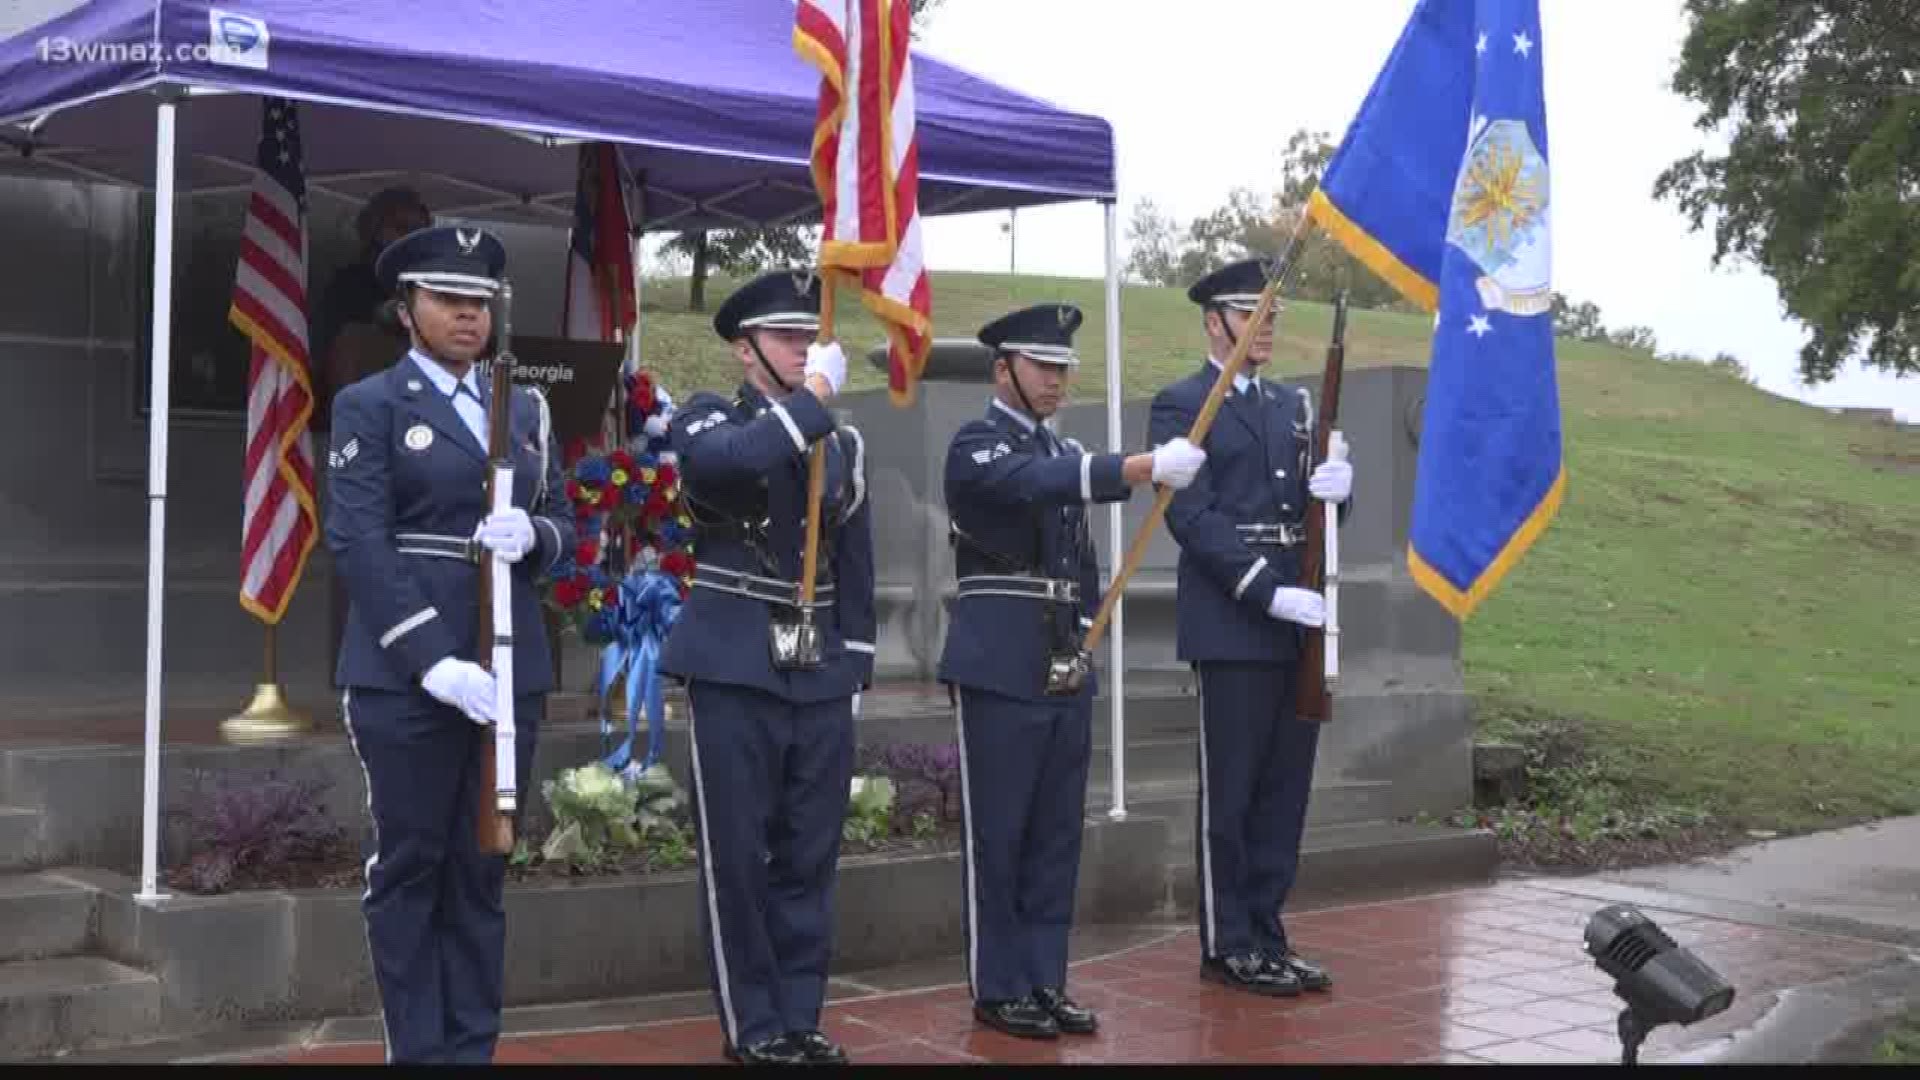 Veterans honored in ceremony at Coleman Hill